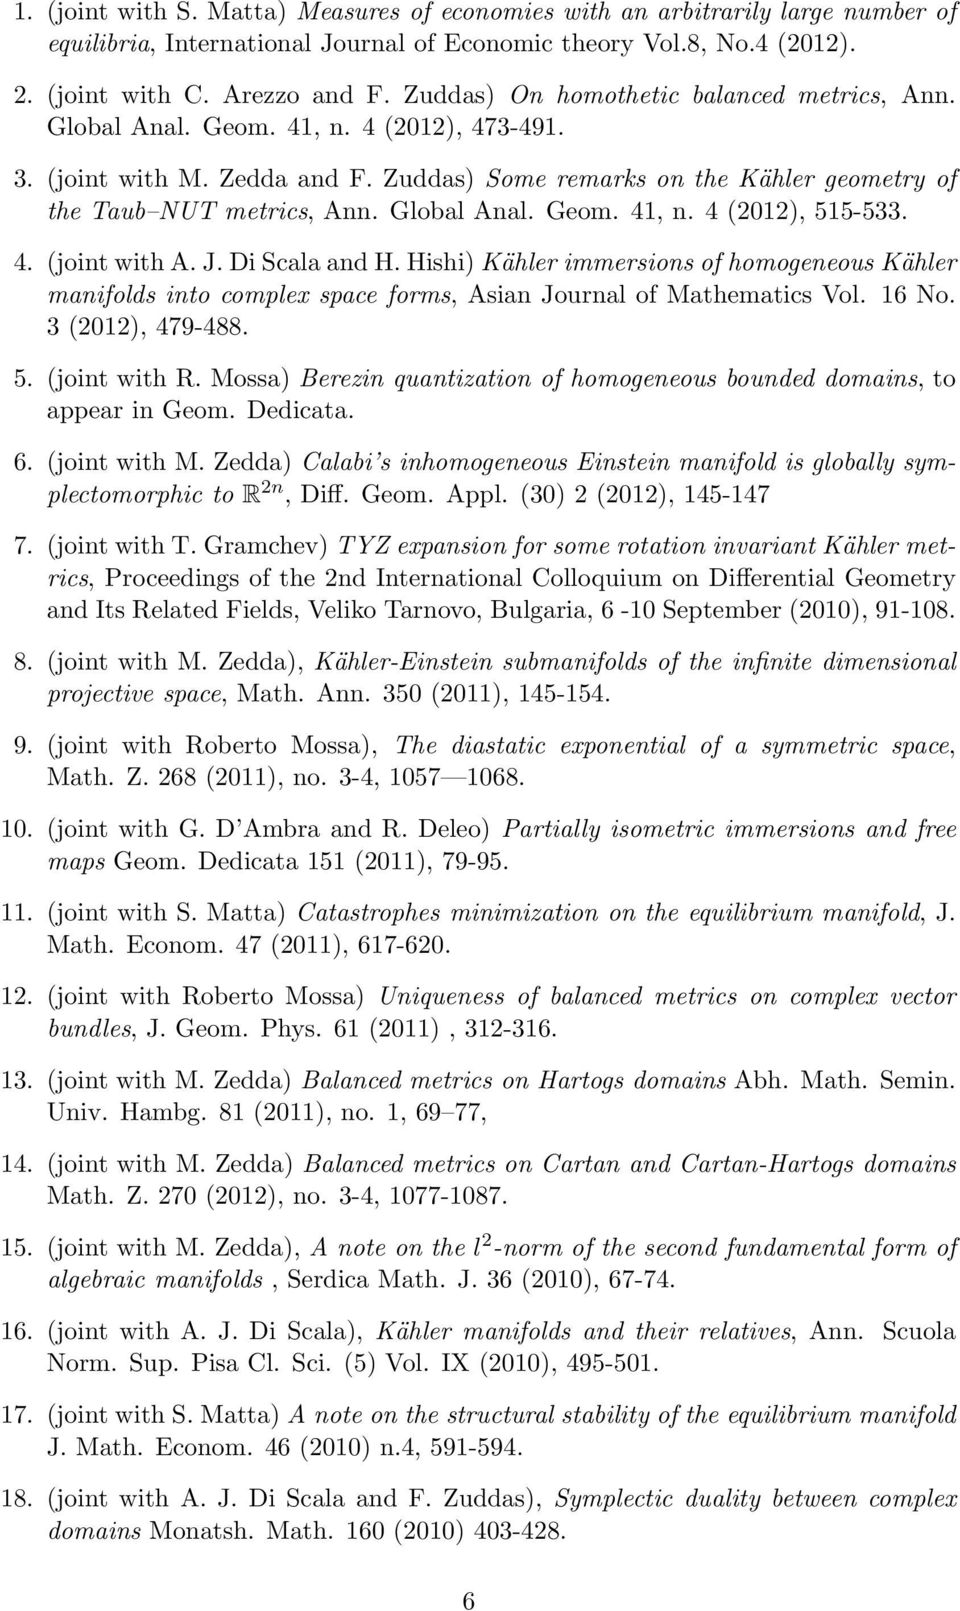 Global Anal. Geom. 41, n. 4 (2012), 515-533. 4. (joint with A. J. Di Scala and H. Hishi) Kähler immersions of homogeneous Kähler manifolds into complex space forms, Asian Journal of Mathematics Vol.